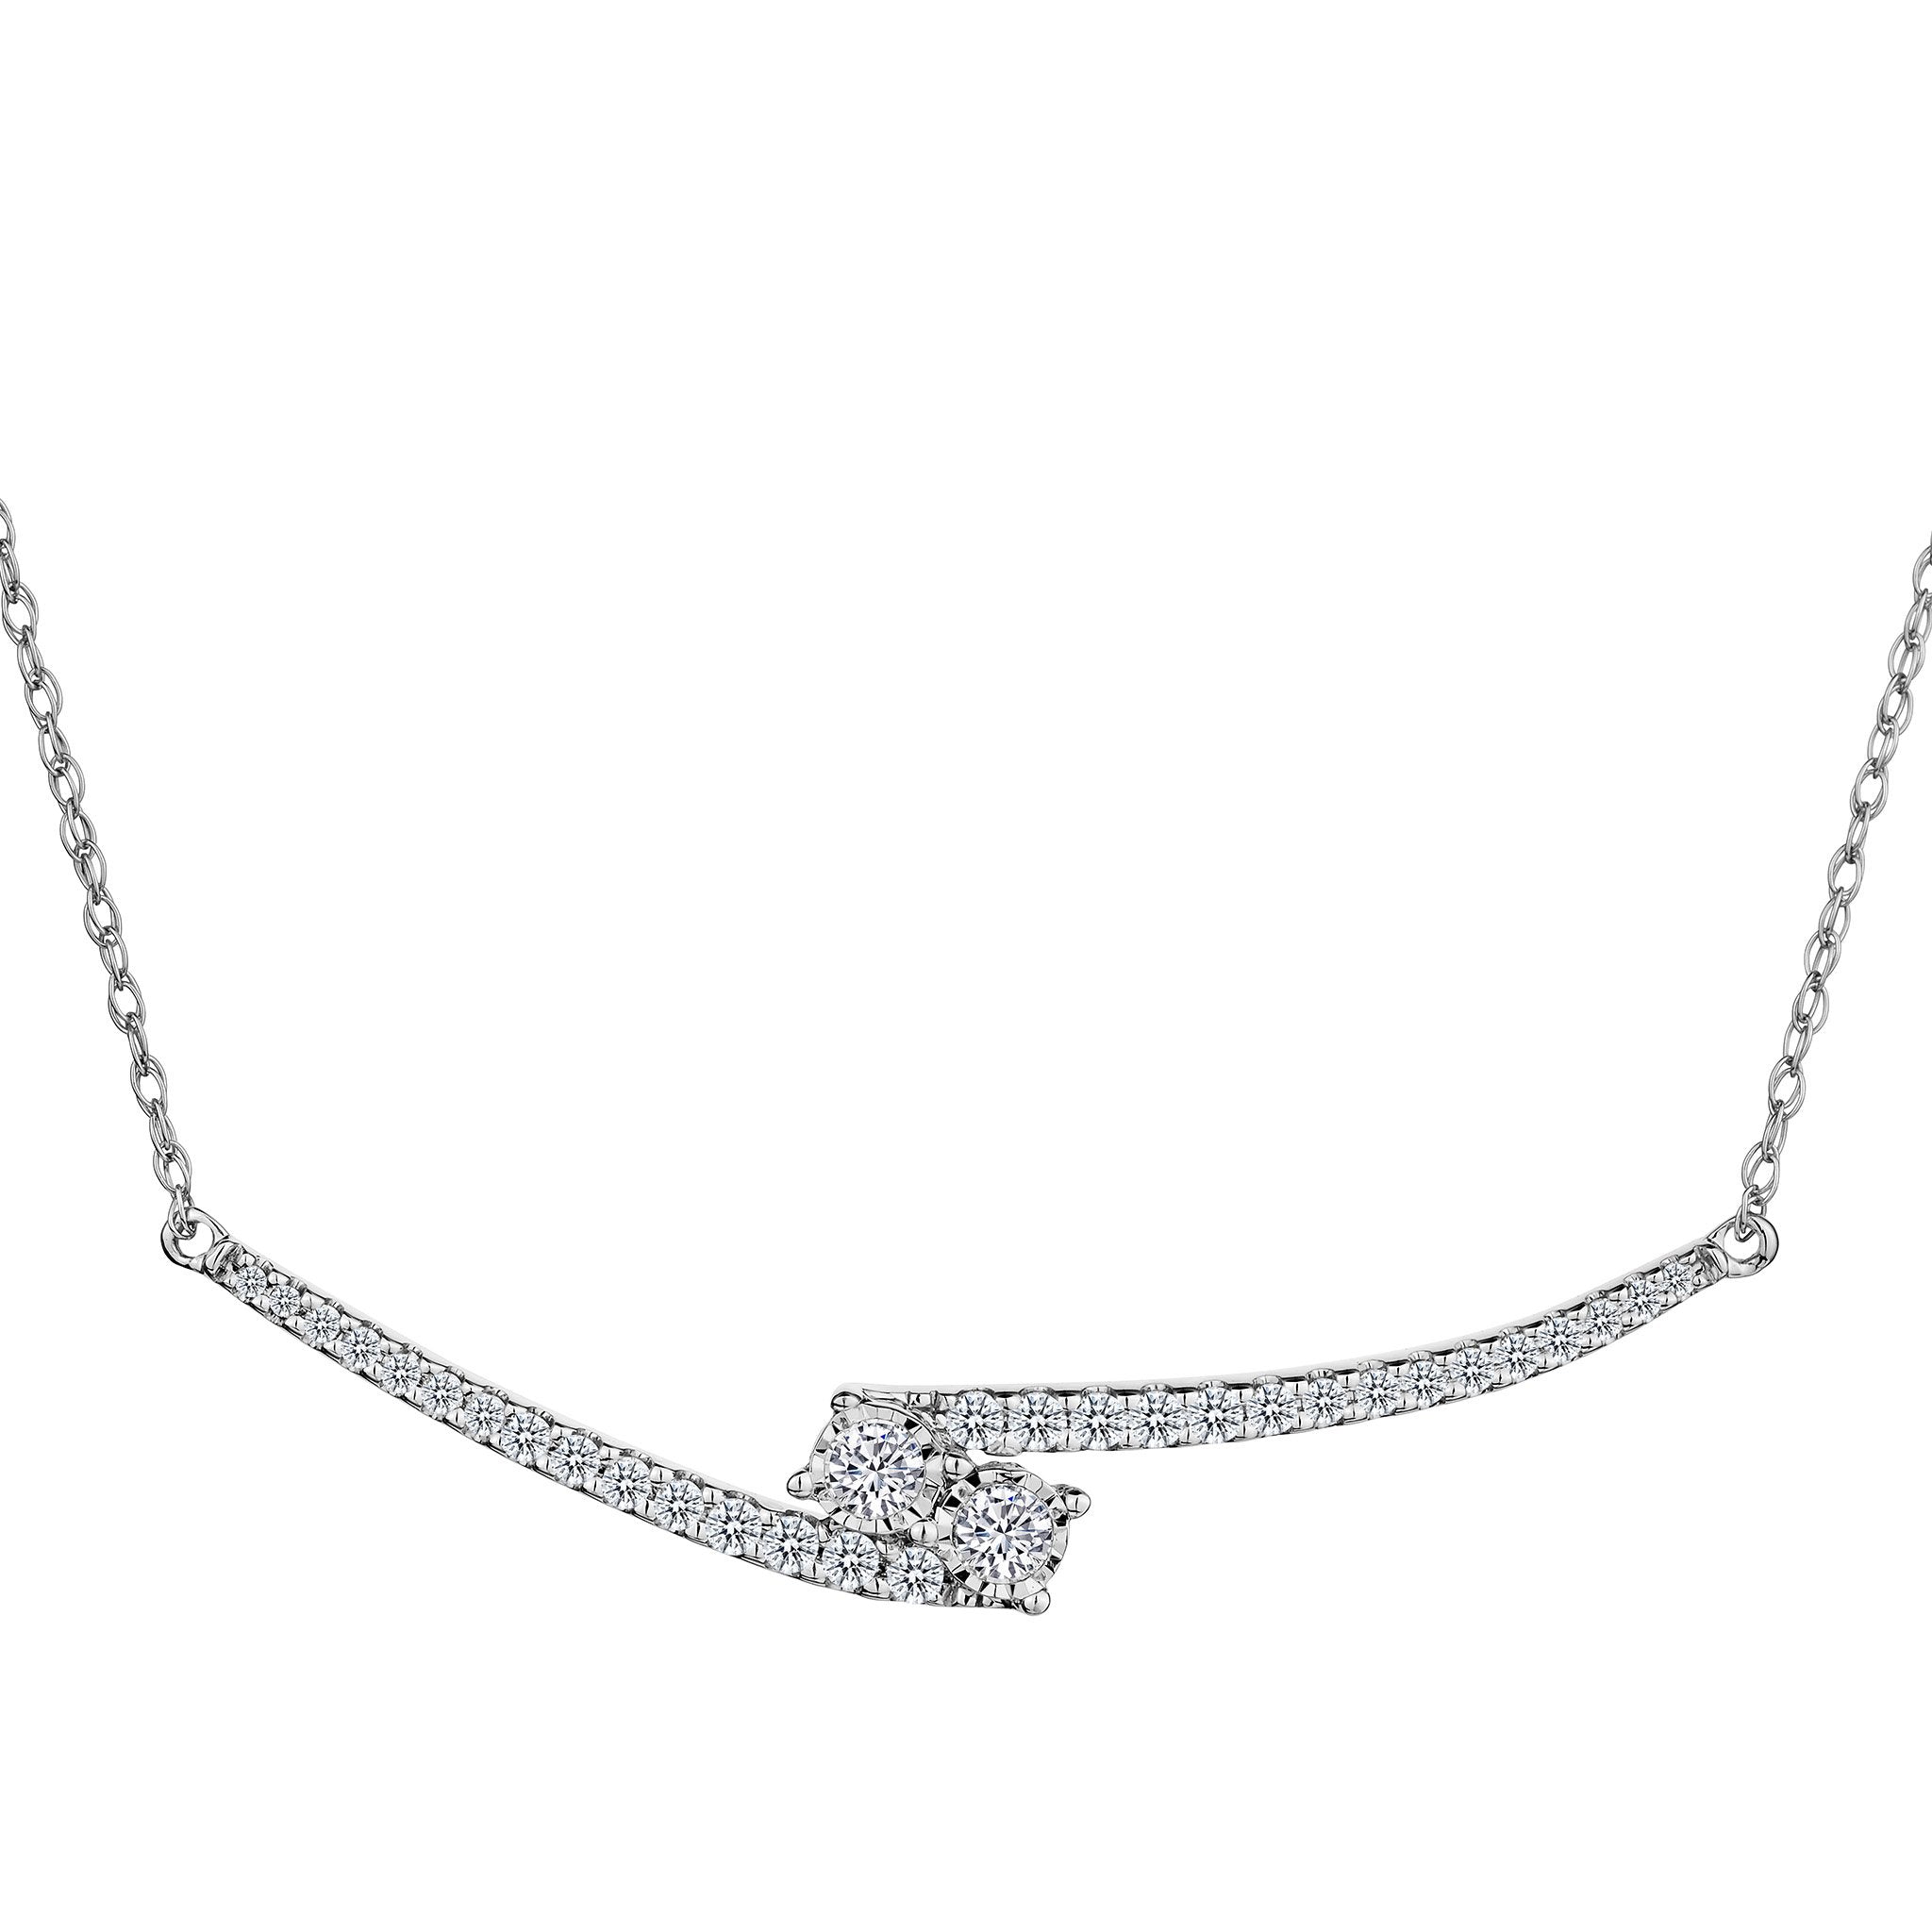 .50 Carat of Diamonds "Together" Necklace, 10kt White Gold.....................NOW